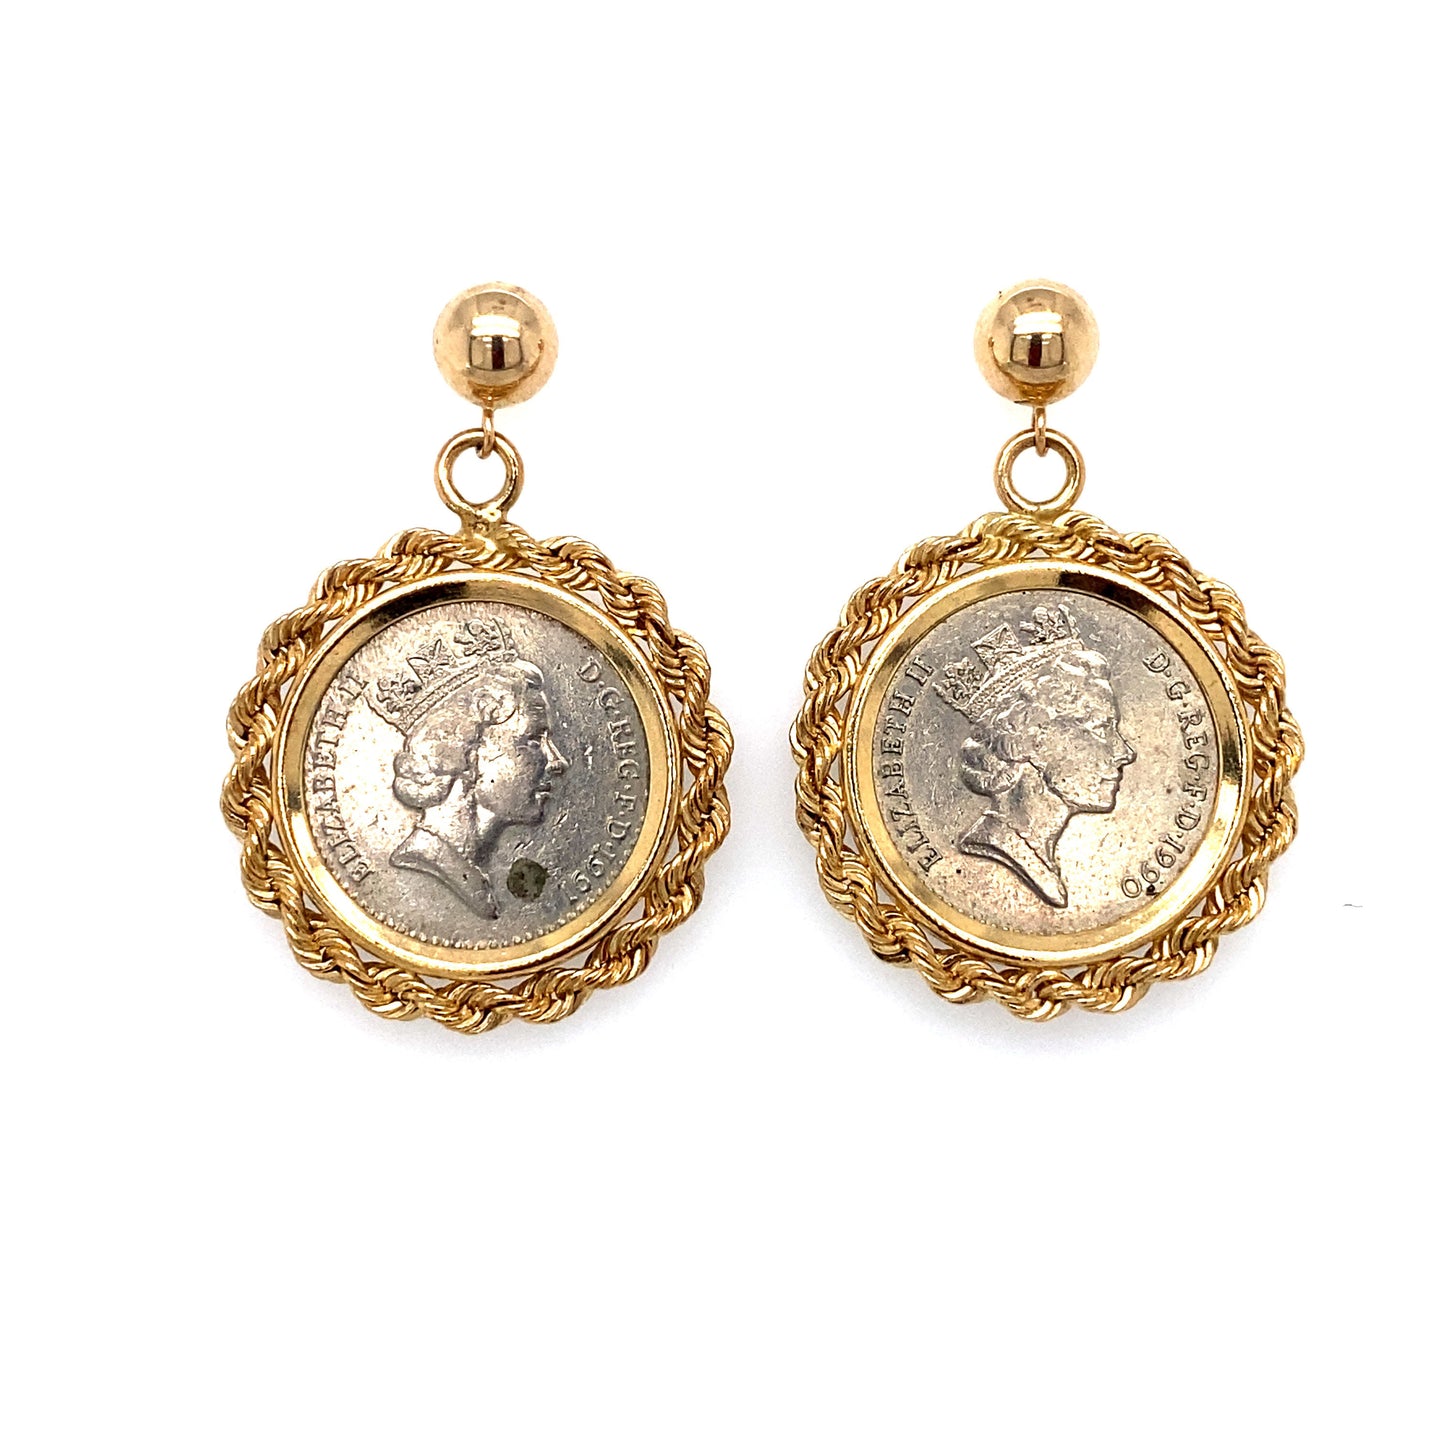 Circa 1990 Five British Pence Coin Earrings with Rope Frames in 14K Gold